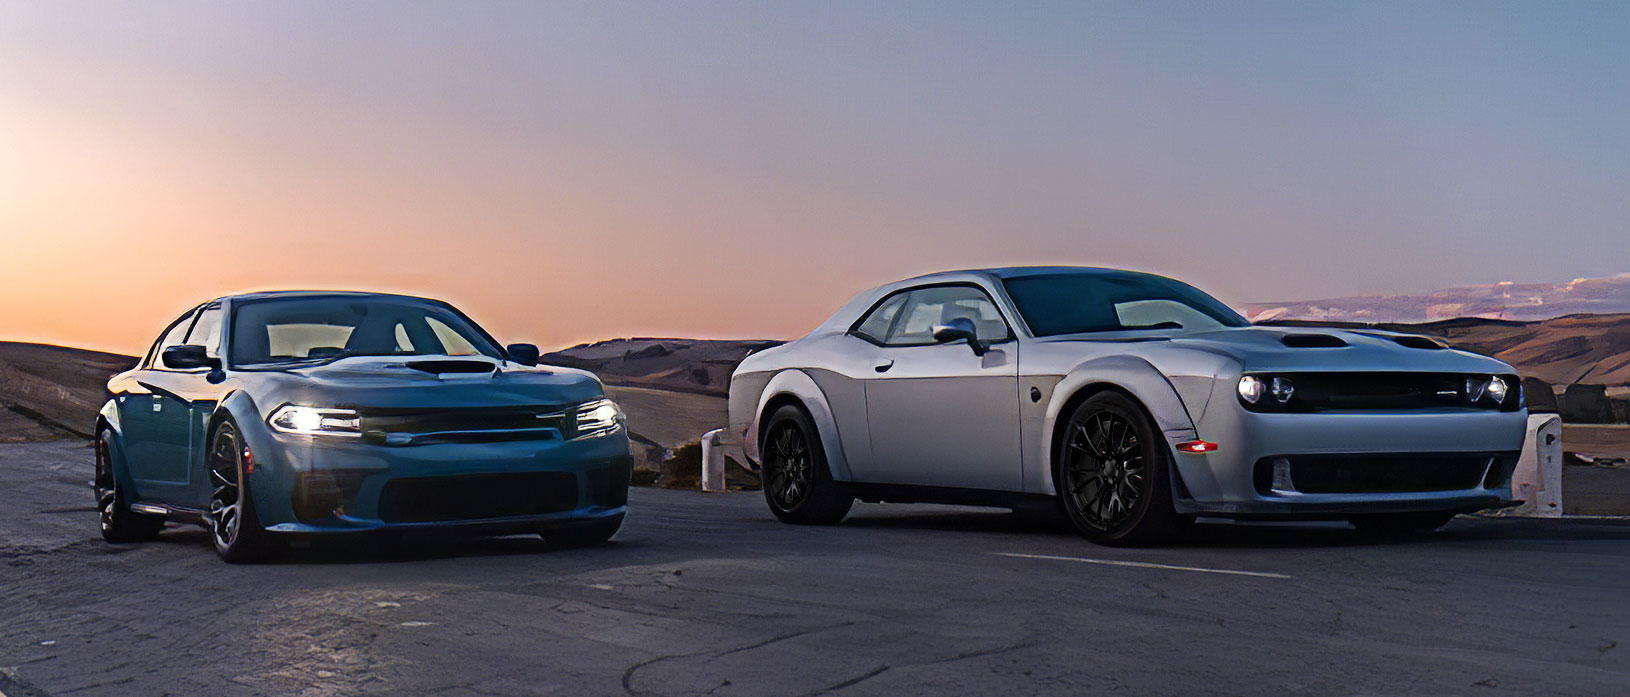 Dodge//SRT<sup>®</sup> Welcomes More Enthusiasts into “The Brotherhood of Muscle”